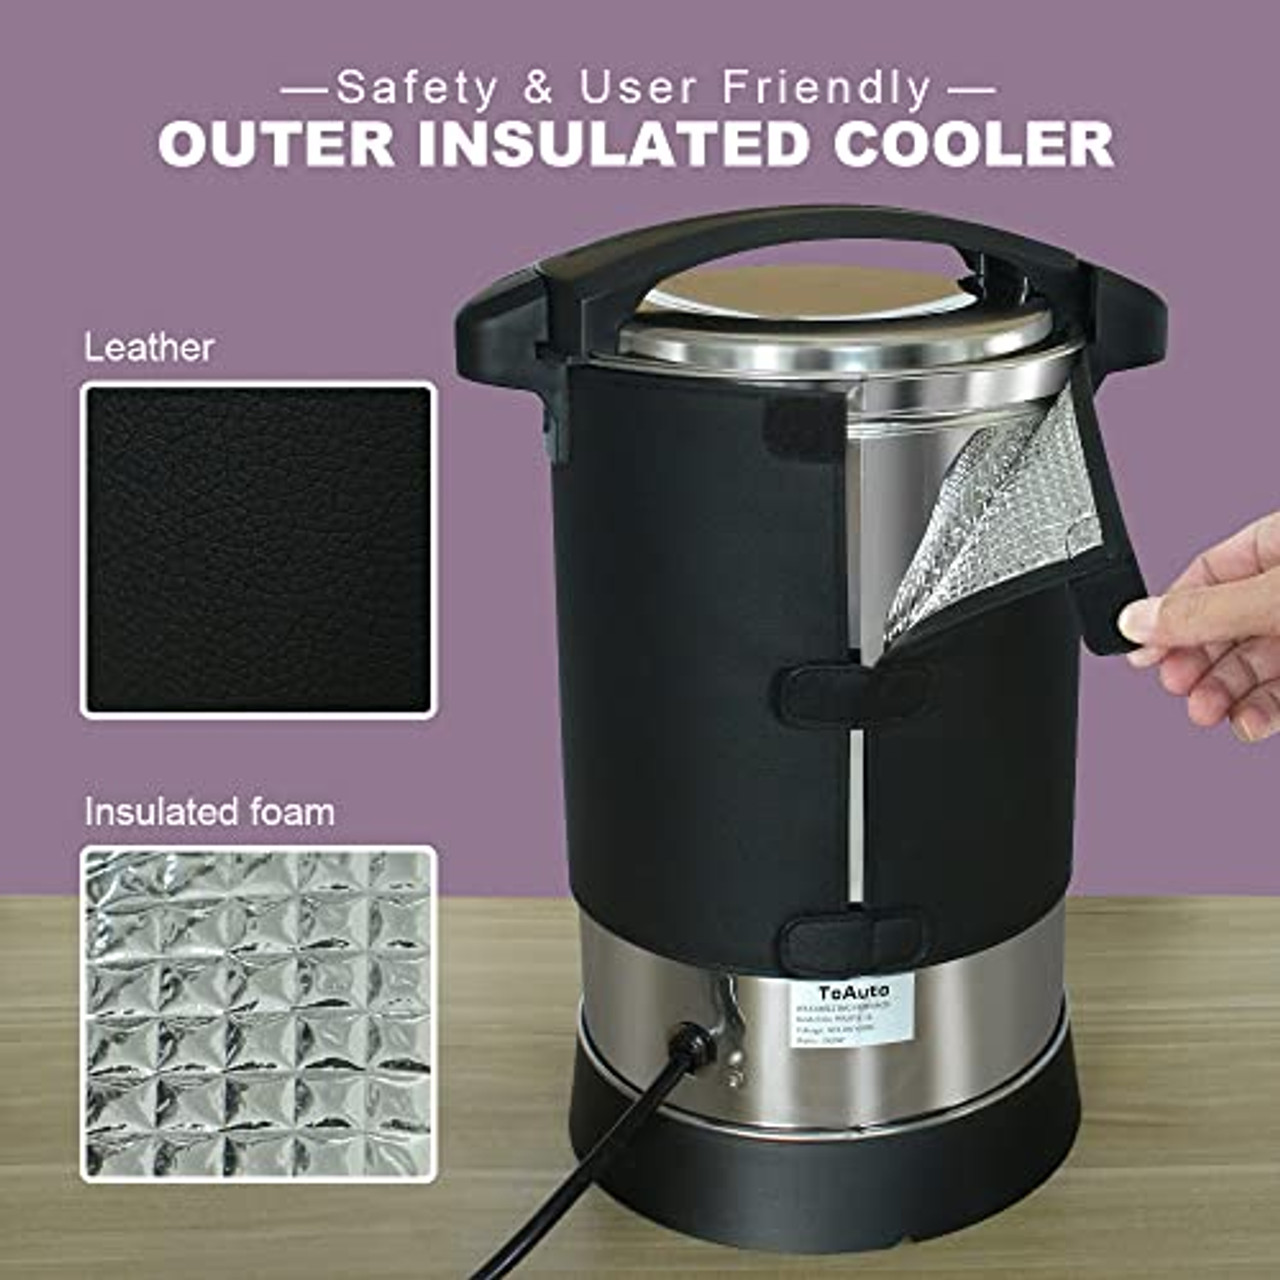 Wax Melter for Candle Making - Candle Wax Melting Pot with Easy